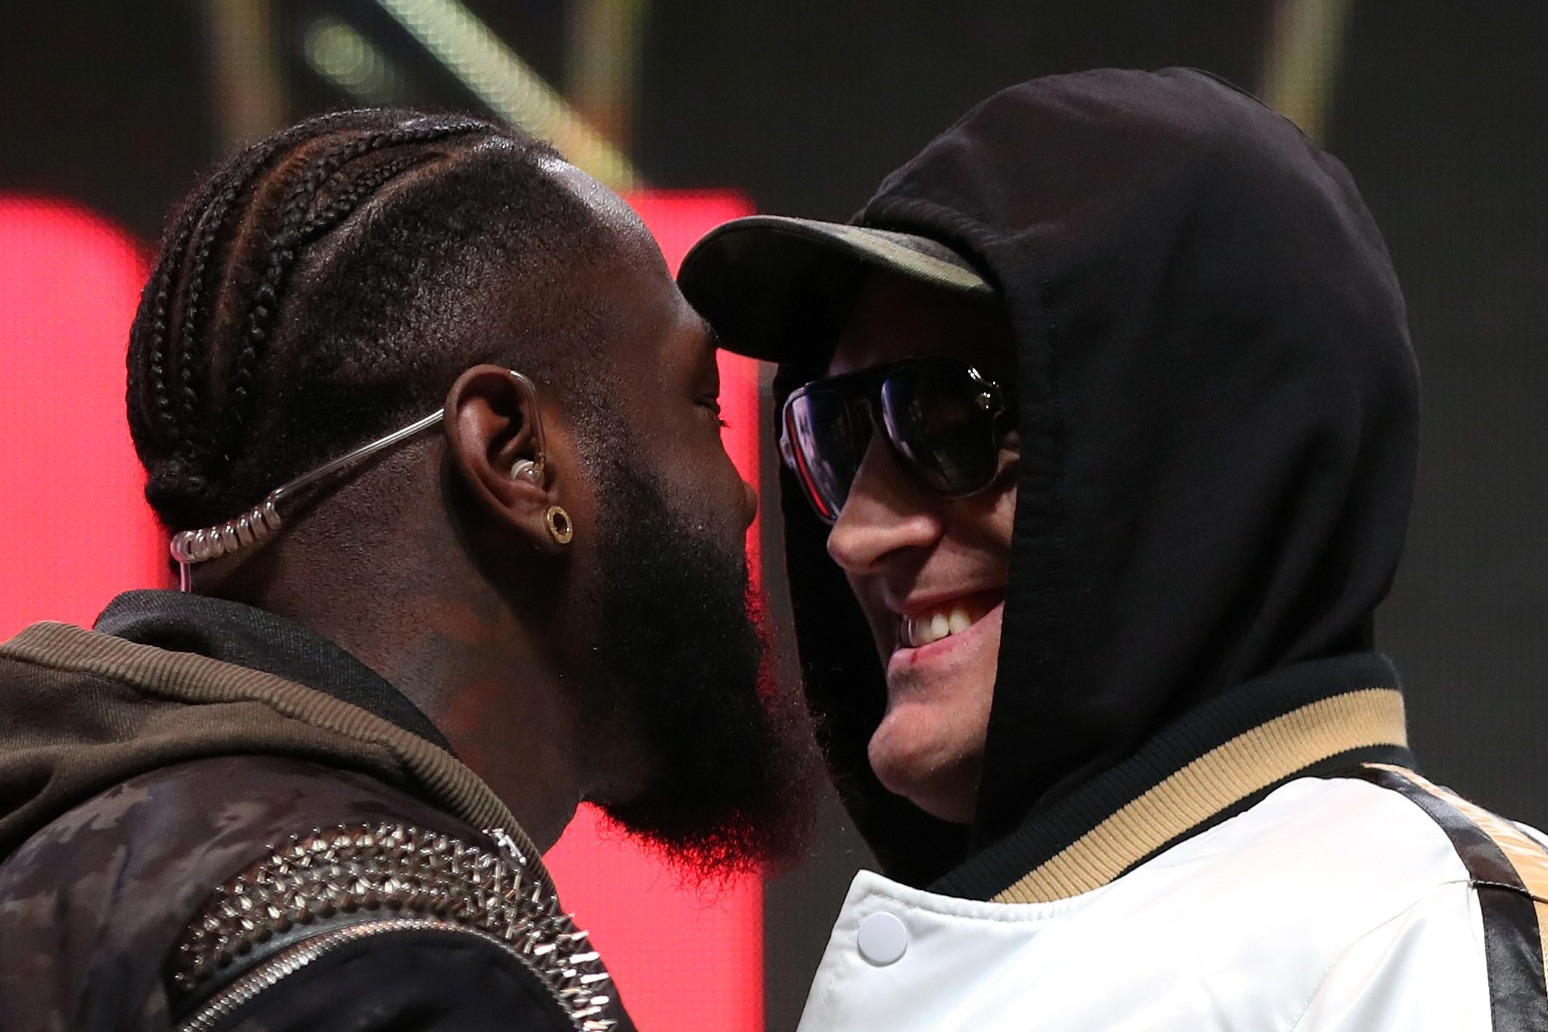 Tyson Fury calls Deontay Wilder ‘weak’ as argument erupts at press conference 